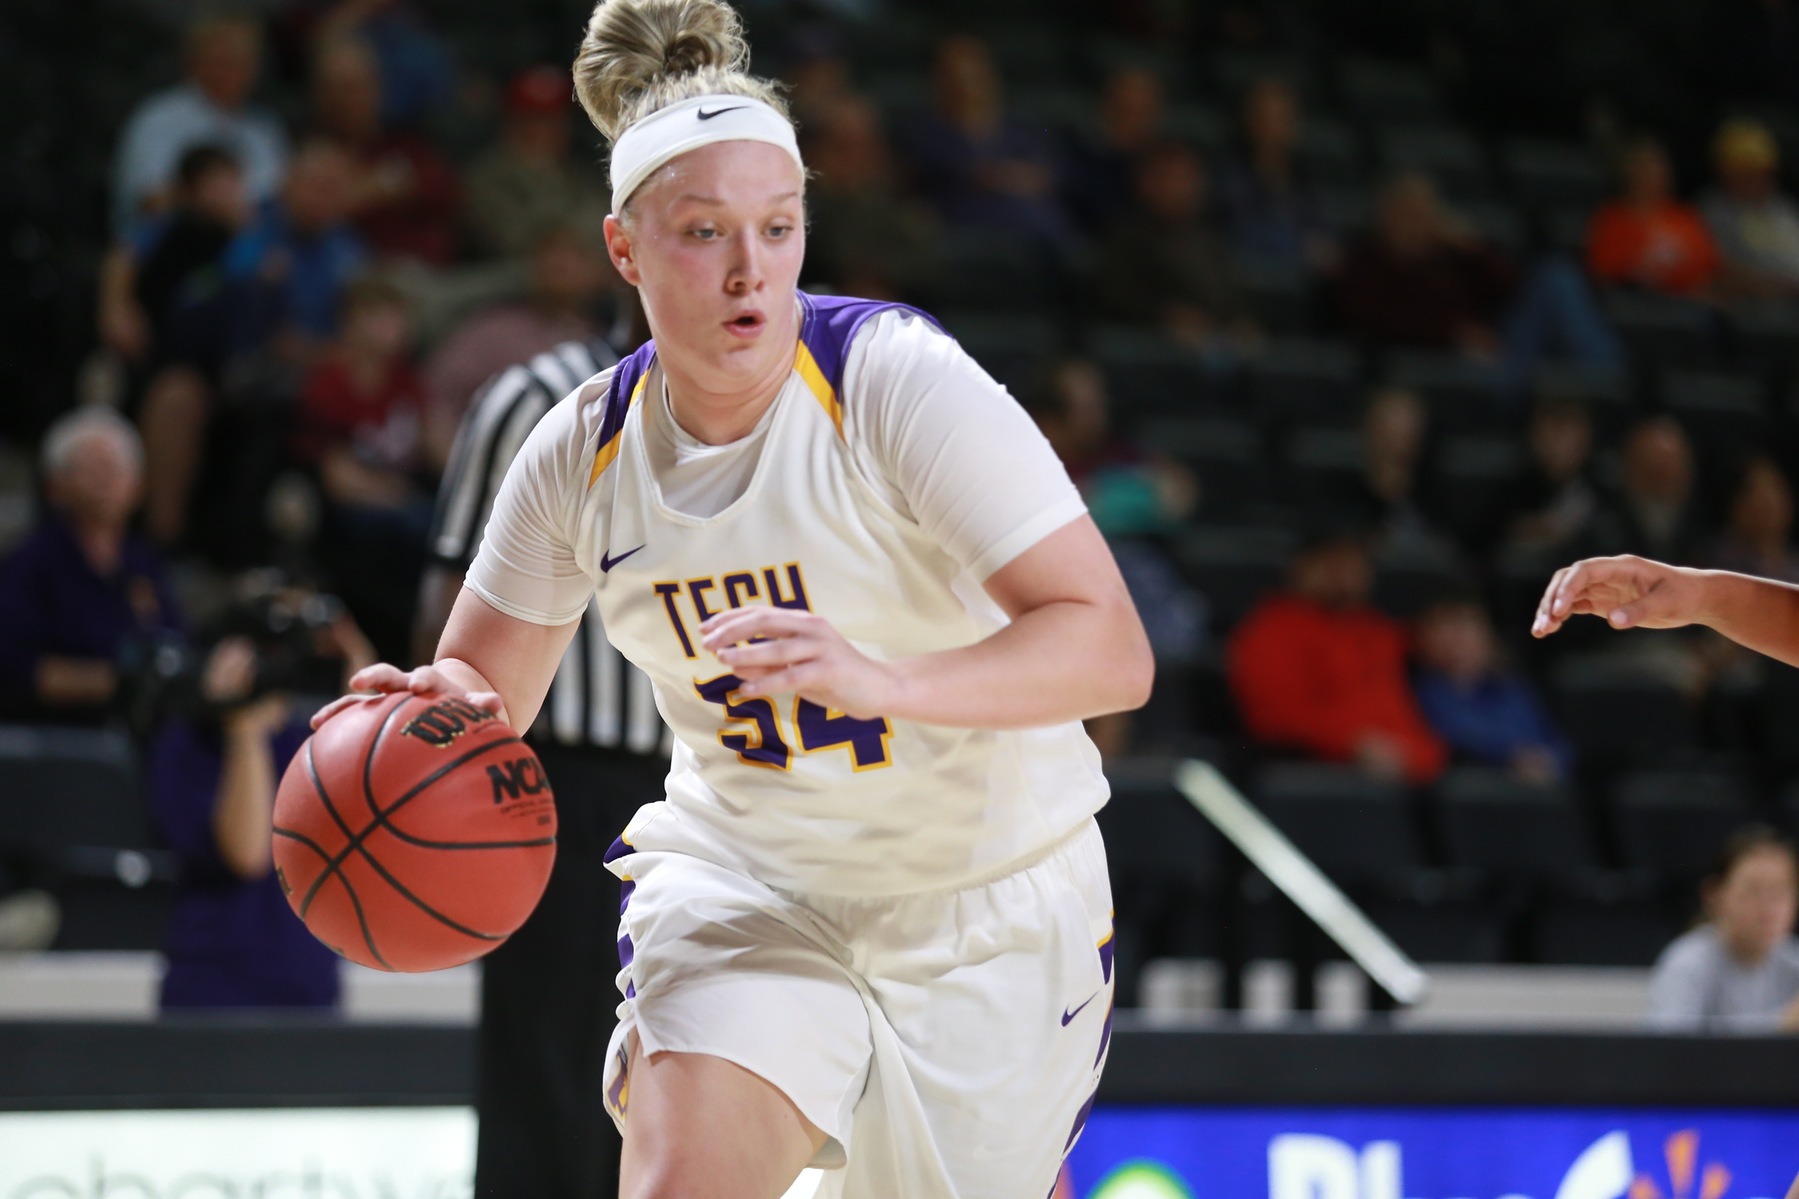 Tech rights ship; defeats Austin Peay for first OVC win